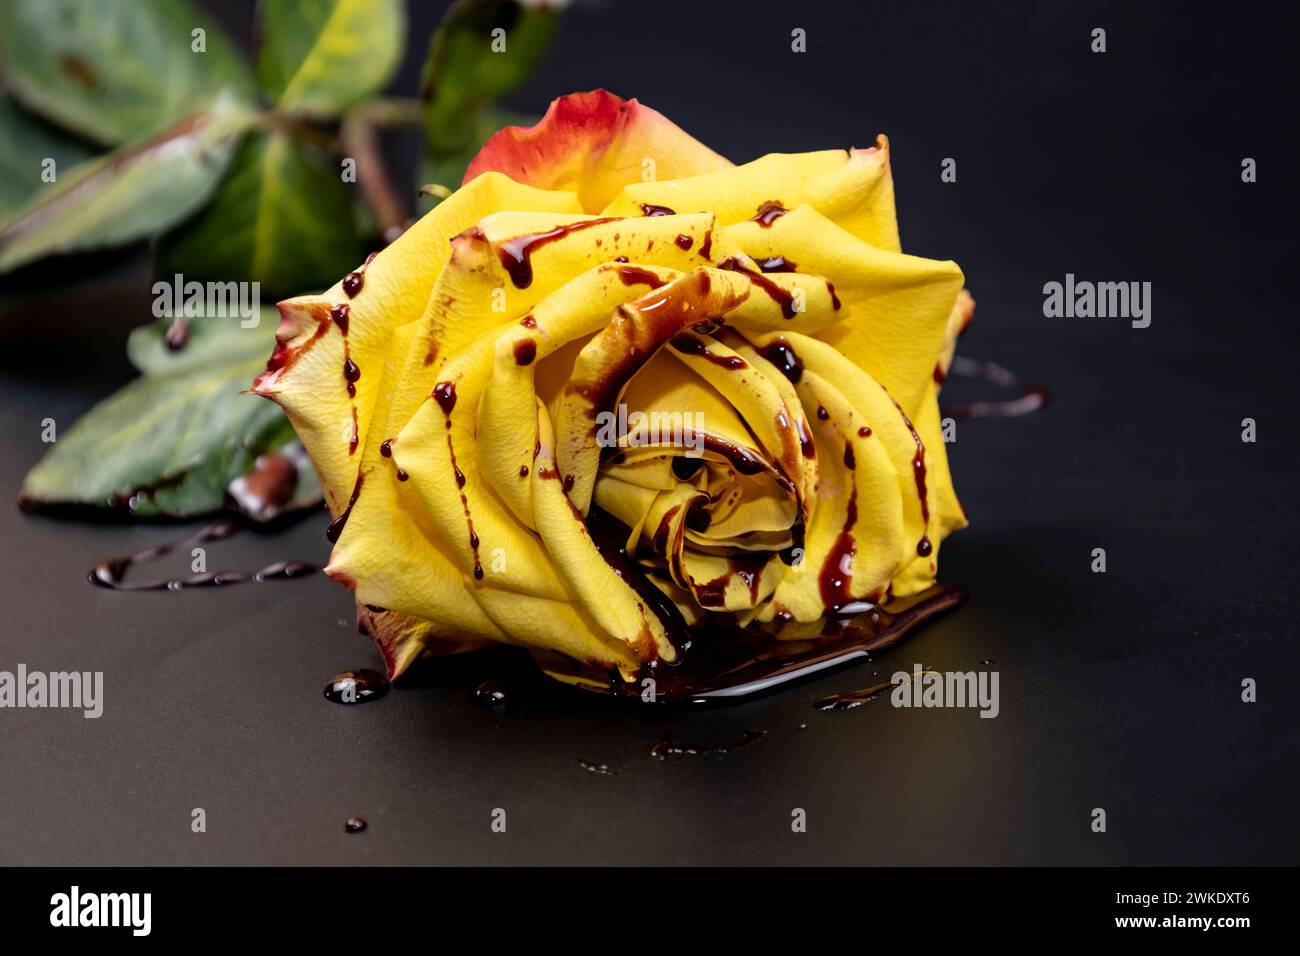 Concept with yellow rose and red blood on dark background. The beautiful rose on bloody background. Stock Photo